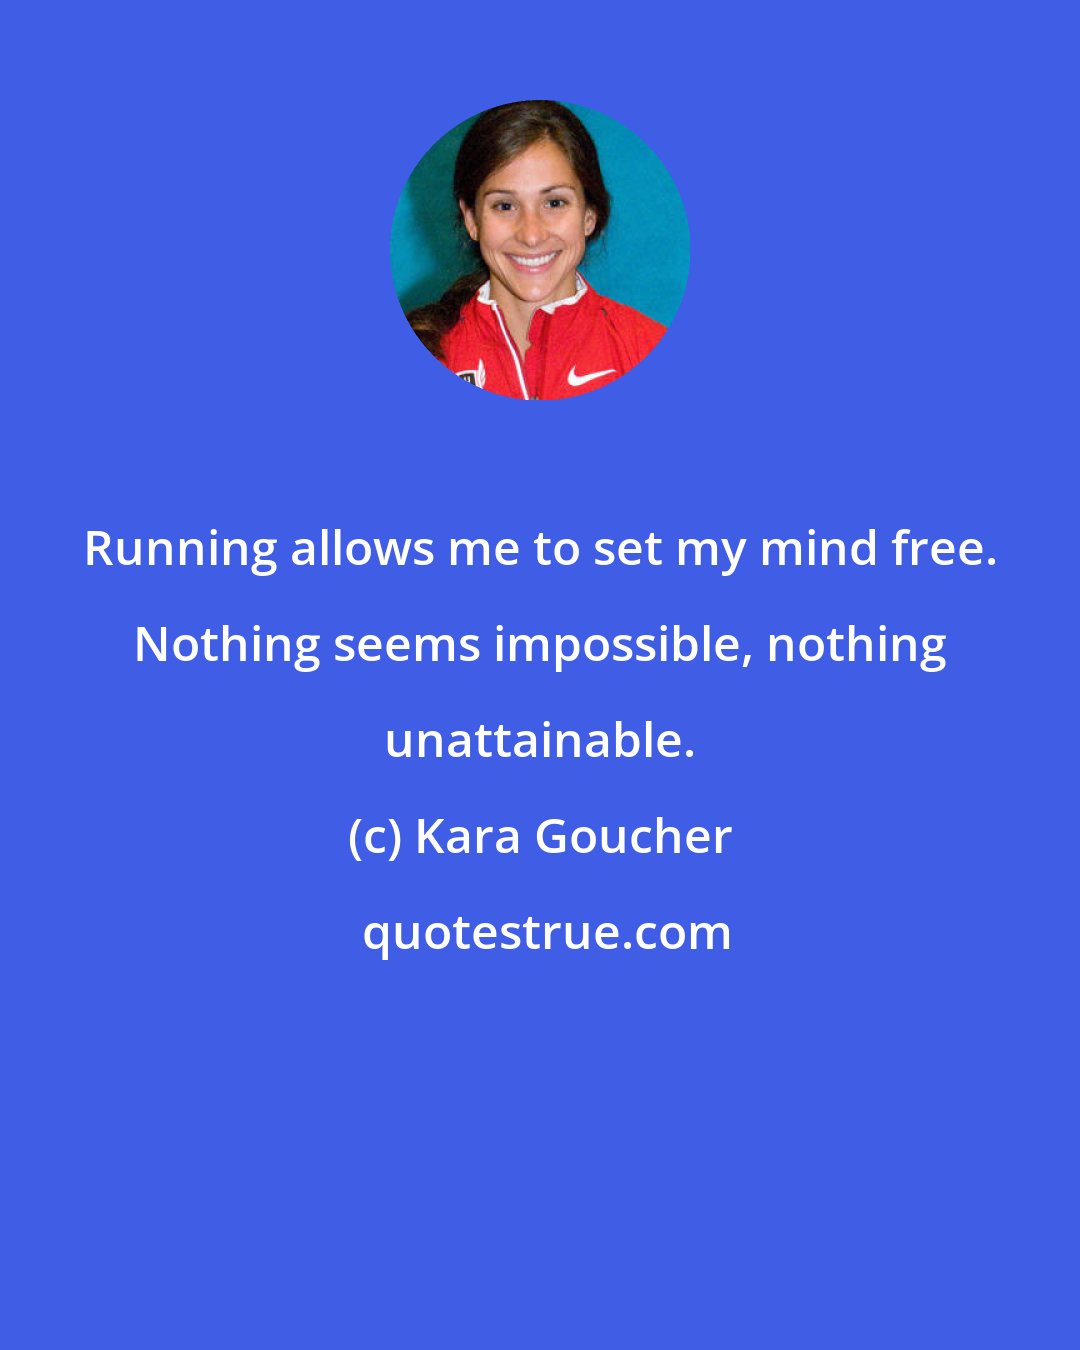 Kara Goucher: Running allows me to set my mind free. Nothing seems impossible, nothing unattainable.